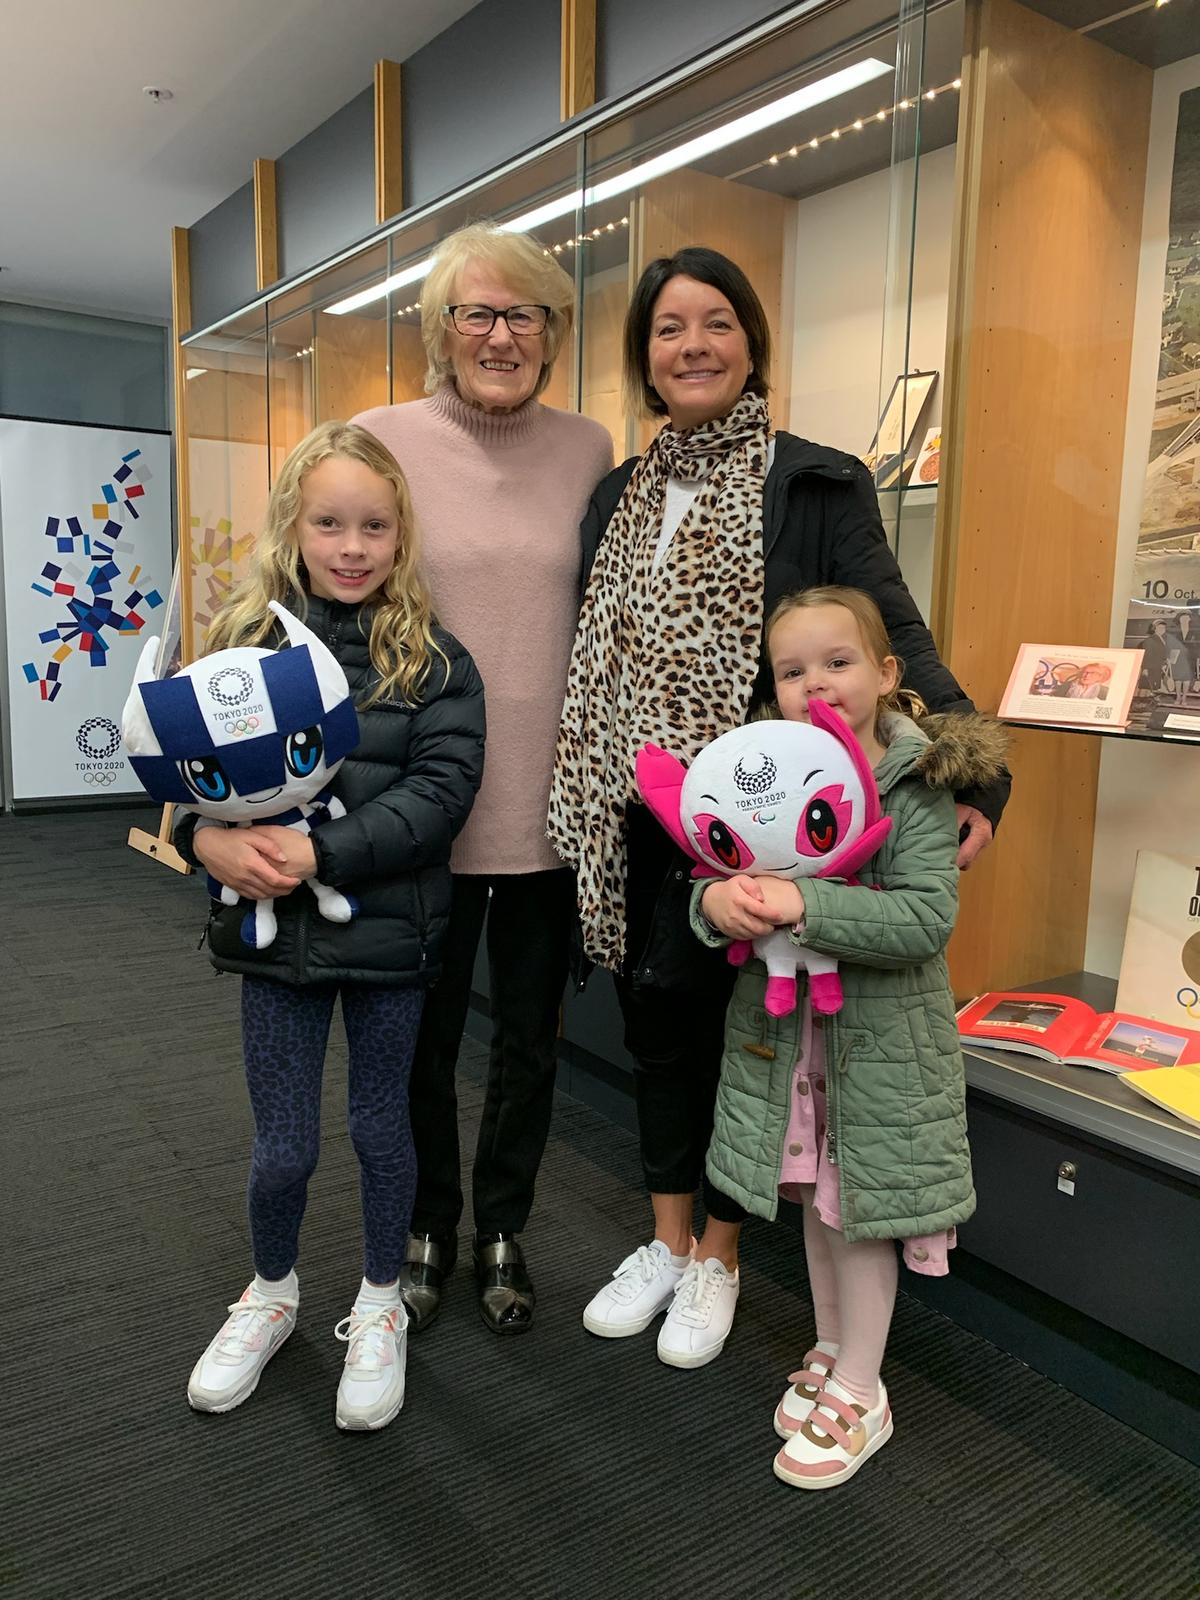 Jan Becker (L) with her daughter-in-law and granddaughters, visiting the "Memories of Tokyo 1964" exhibition at the Consulate-General of Japan in Melbourne, Australia, in July 2021. Items such as her scrapbook and commemorative stamps are currently on display. (Courtesy of Jan Becker)